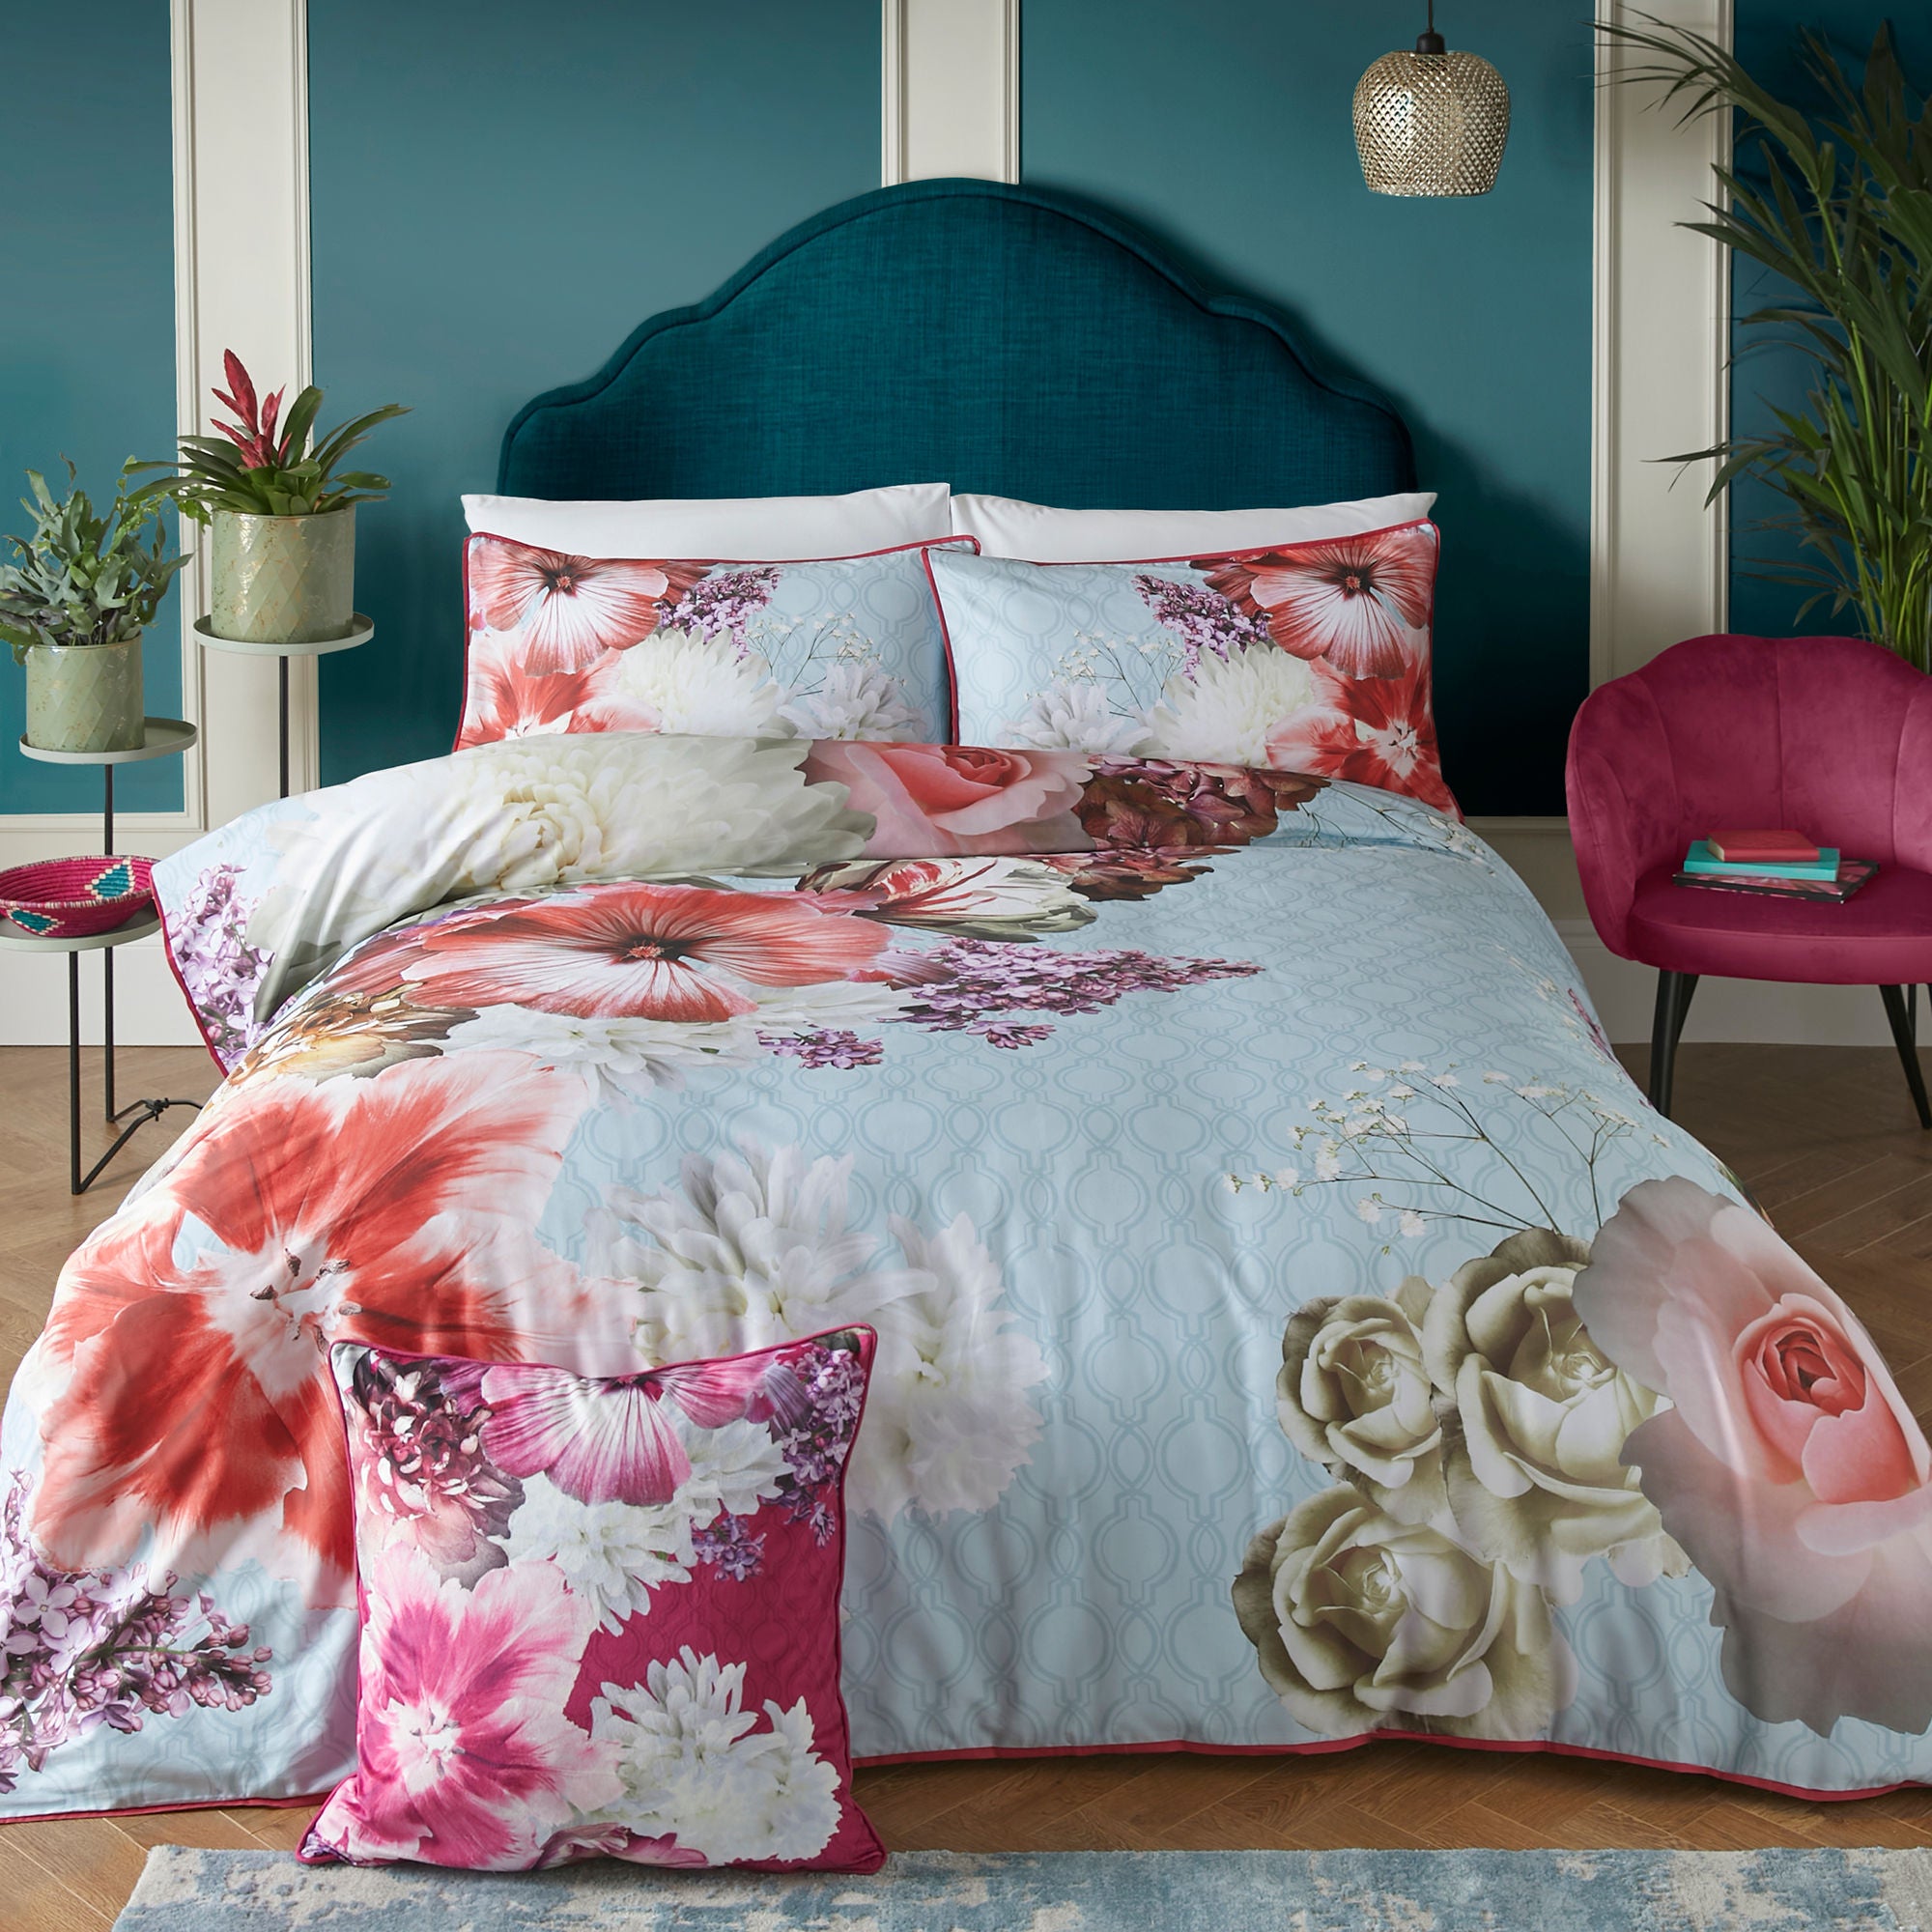 Mayfair Lady Duvet Cover Set by Laurence Llewelyn-Bowen in Blue - Duvet Cover Set - Laurence Llewelyn-Bowen